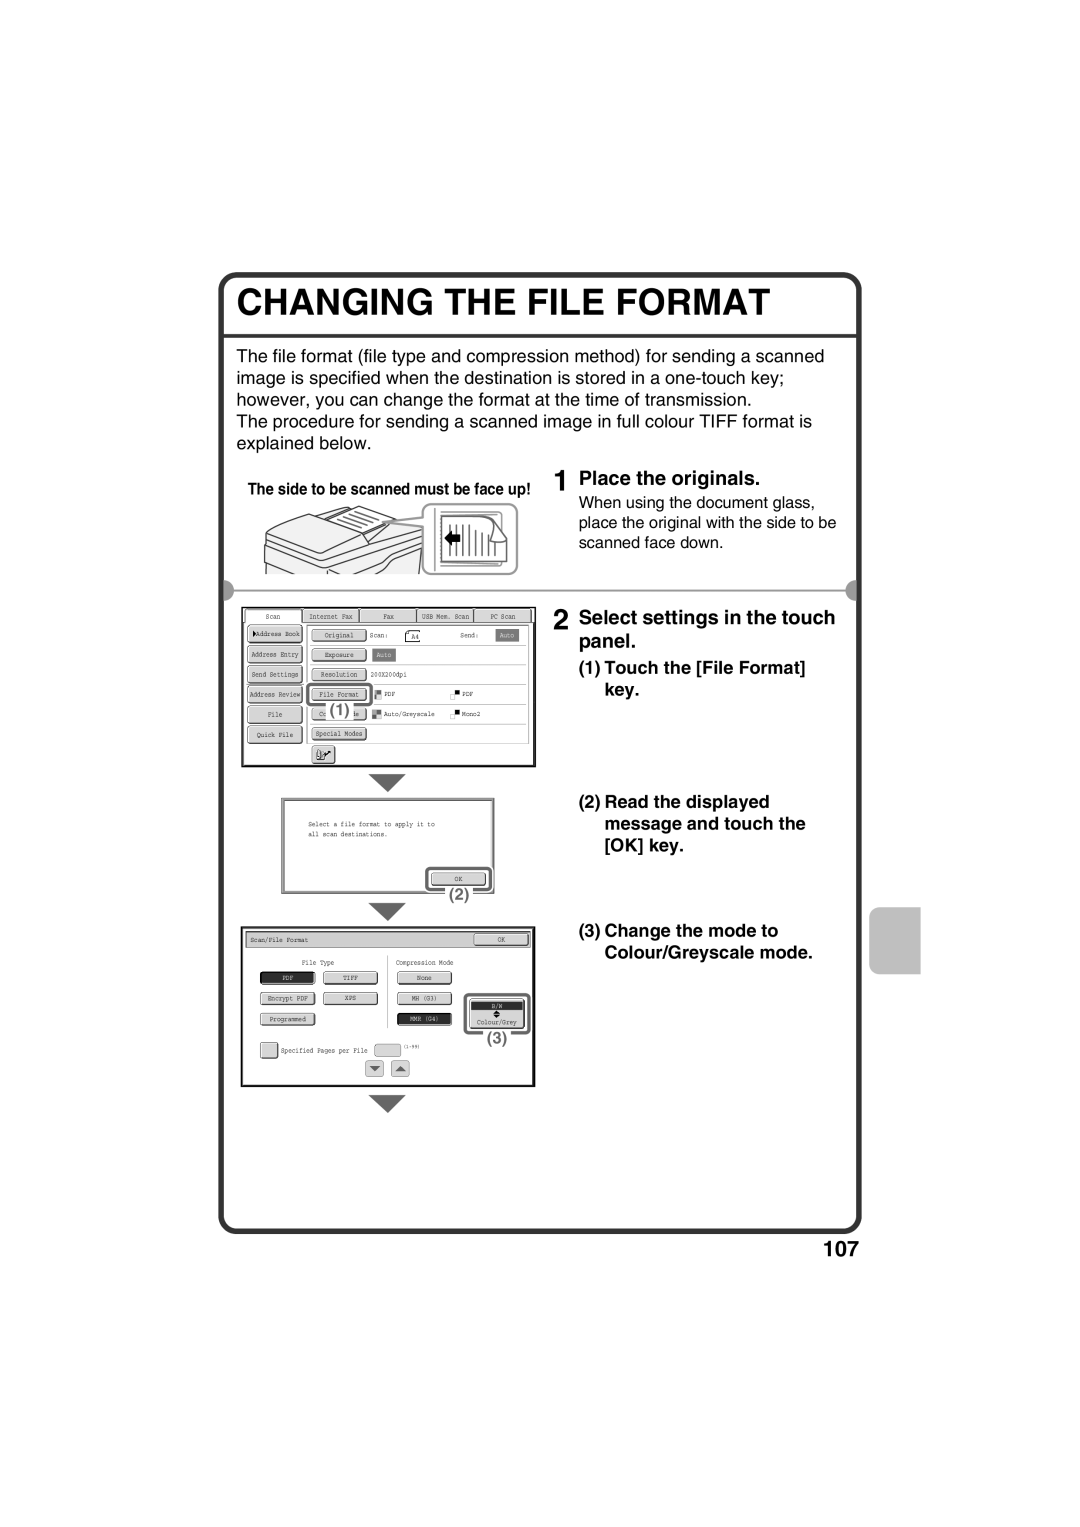 Sharp MX-C381, MX-C311 Changing The File Format, Touch the File Format key, Change the mode to Colour/Greyscale mode 